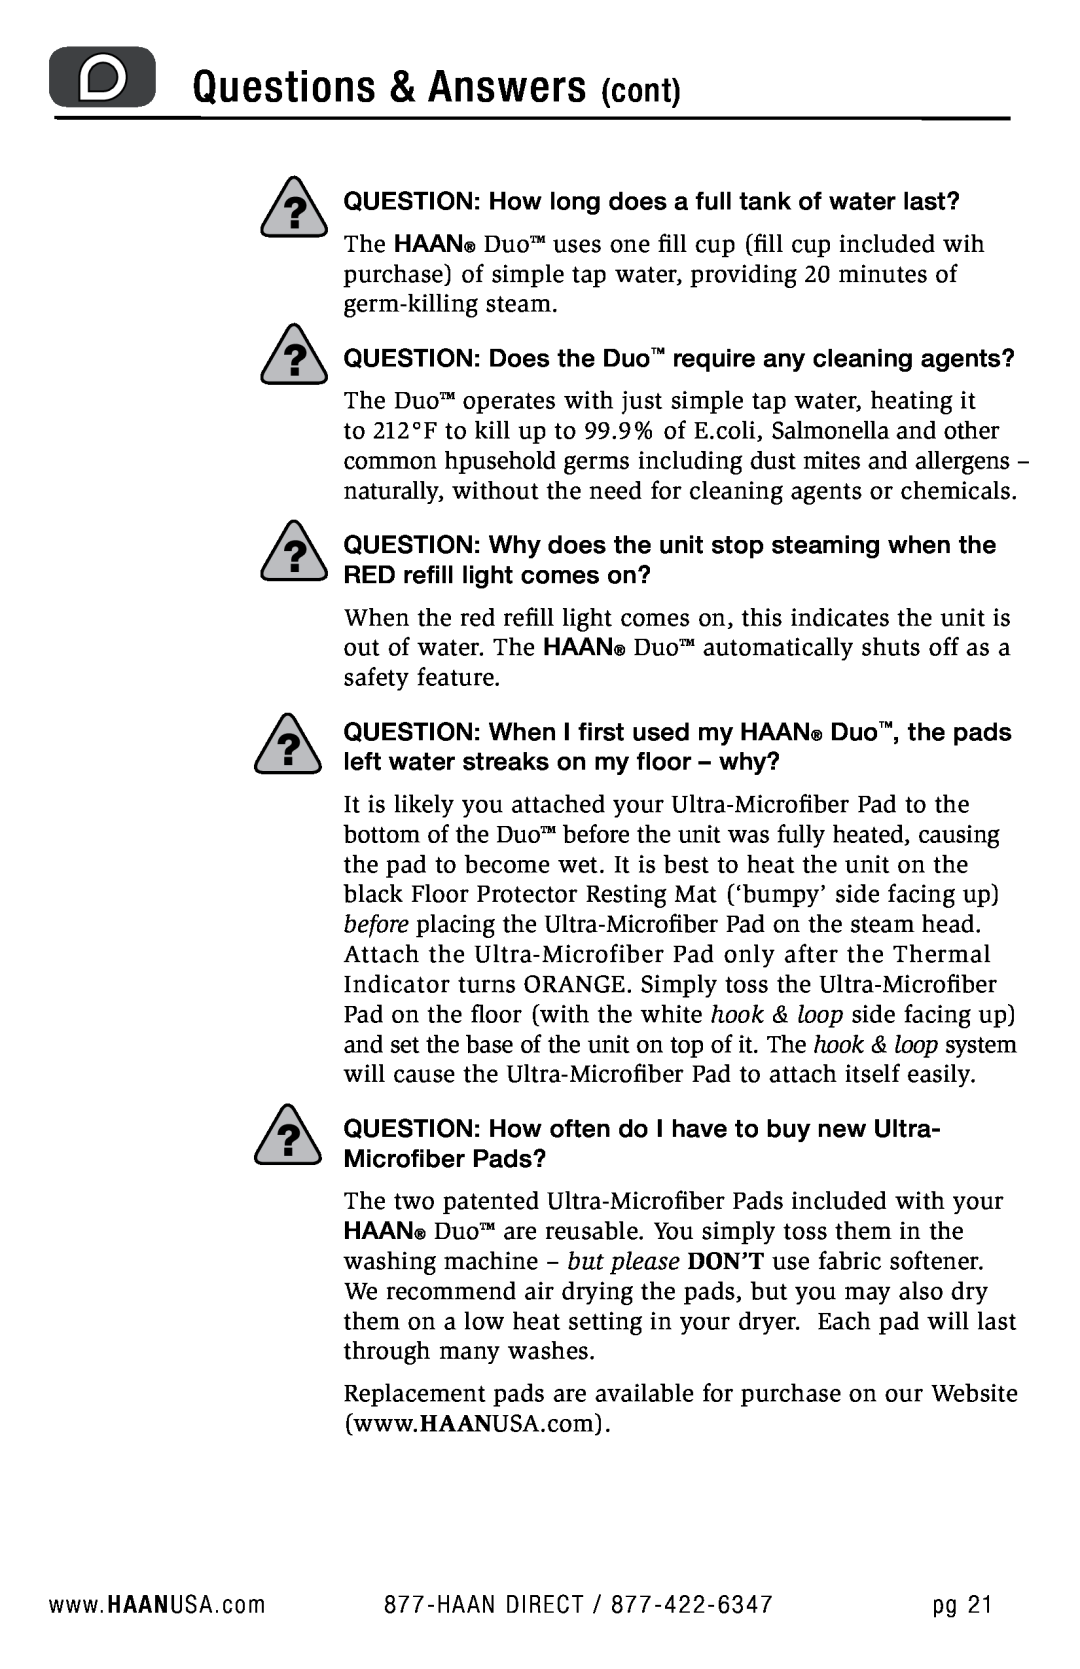 Haan HD-50 user manual Questions & Answers cont, w w w. H A A N USA . com 